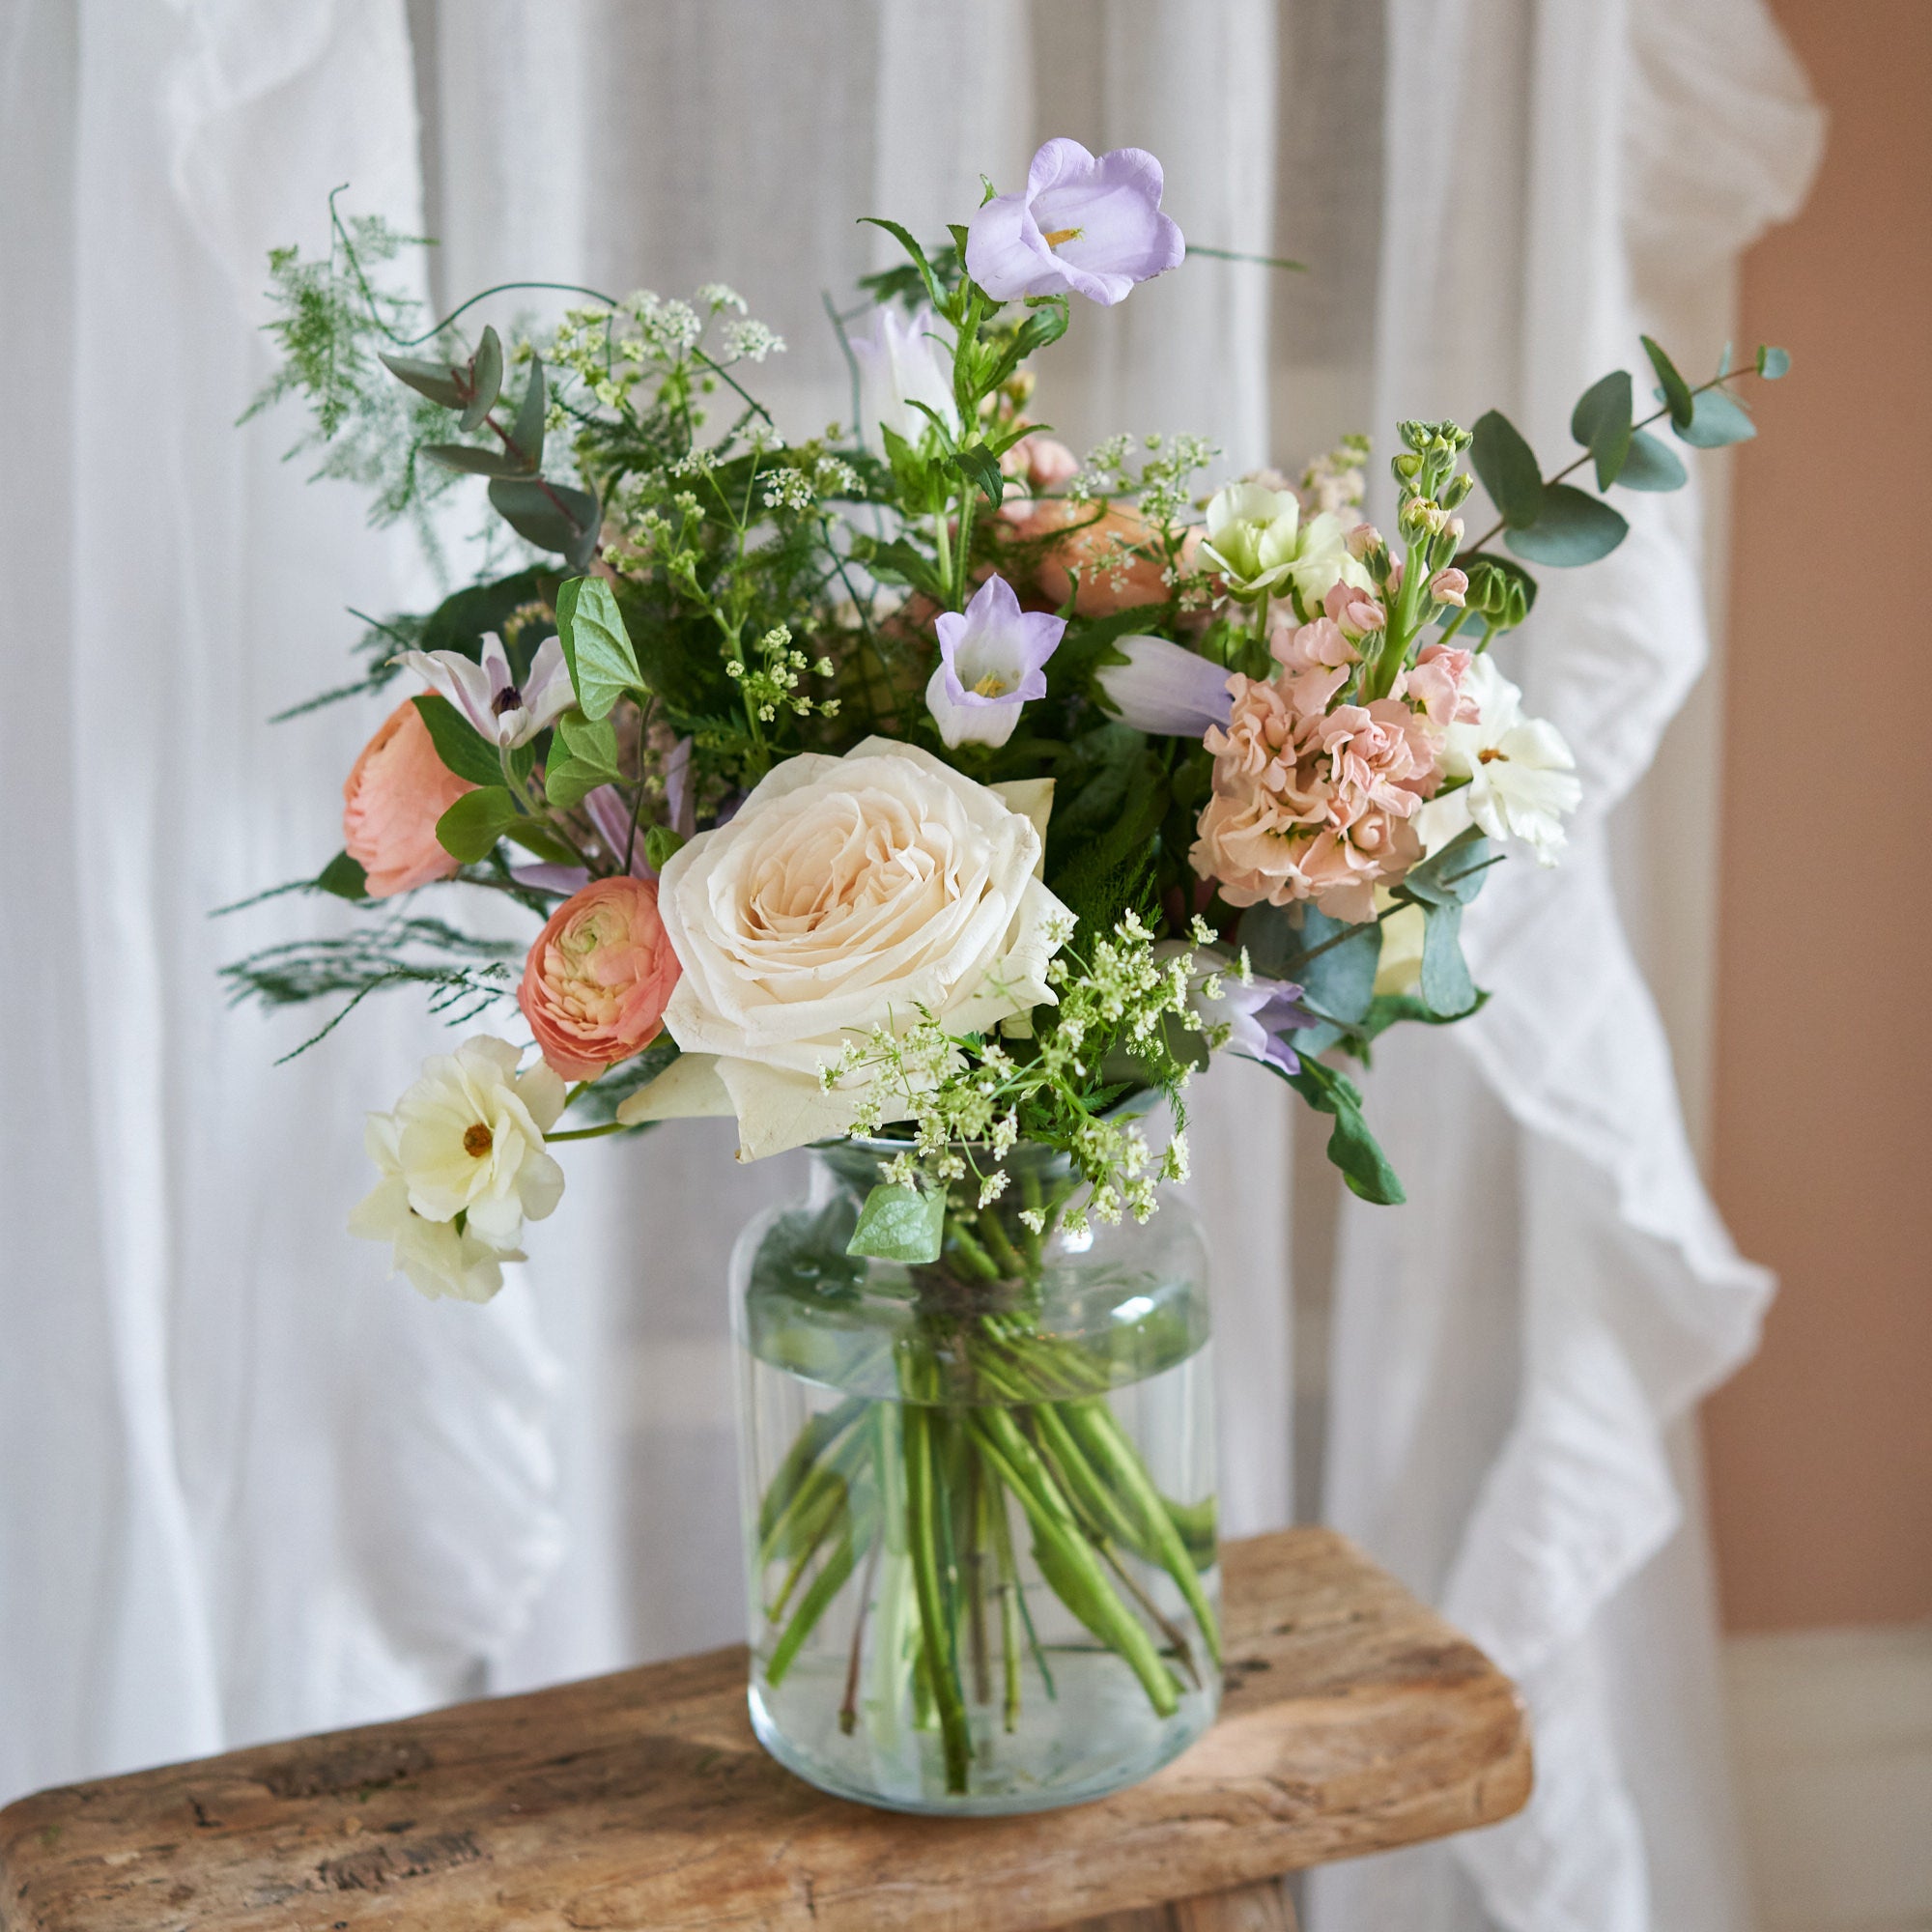 pastel wildflower wedding flowers to decorate tables and wedding venue